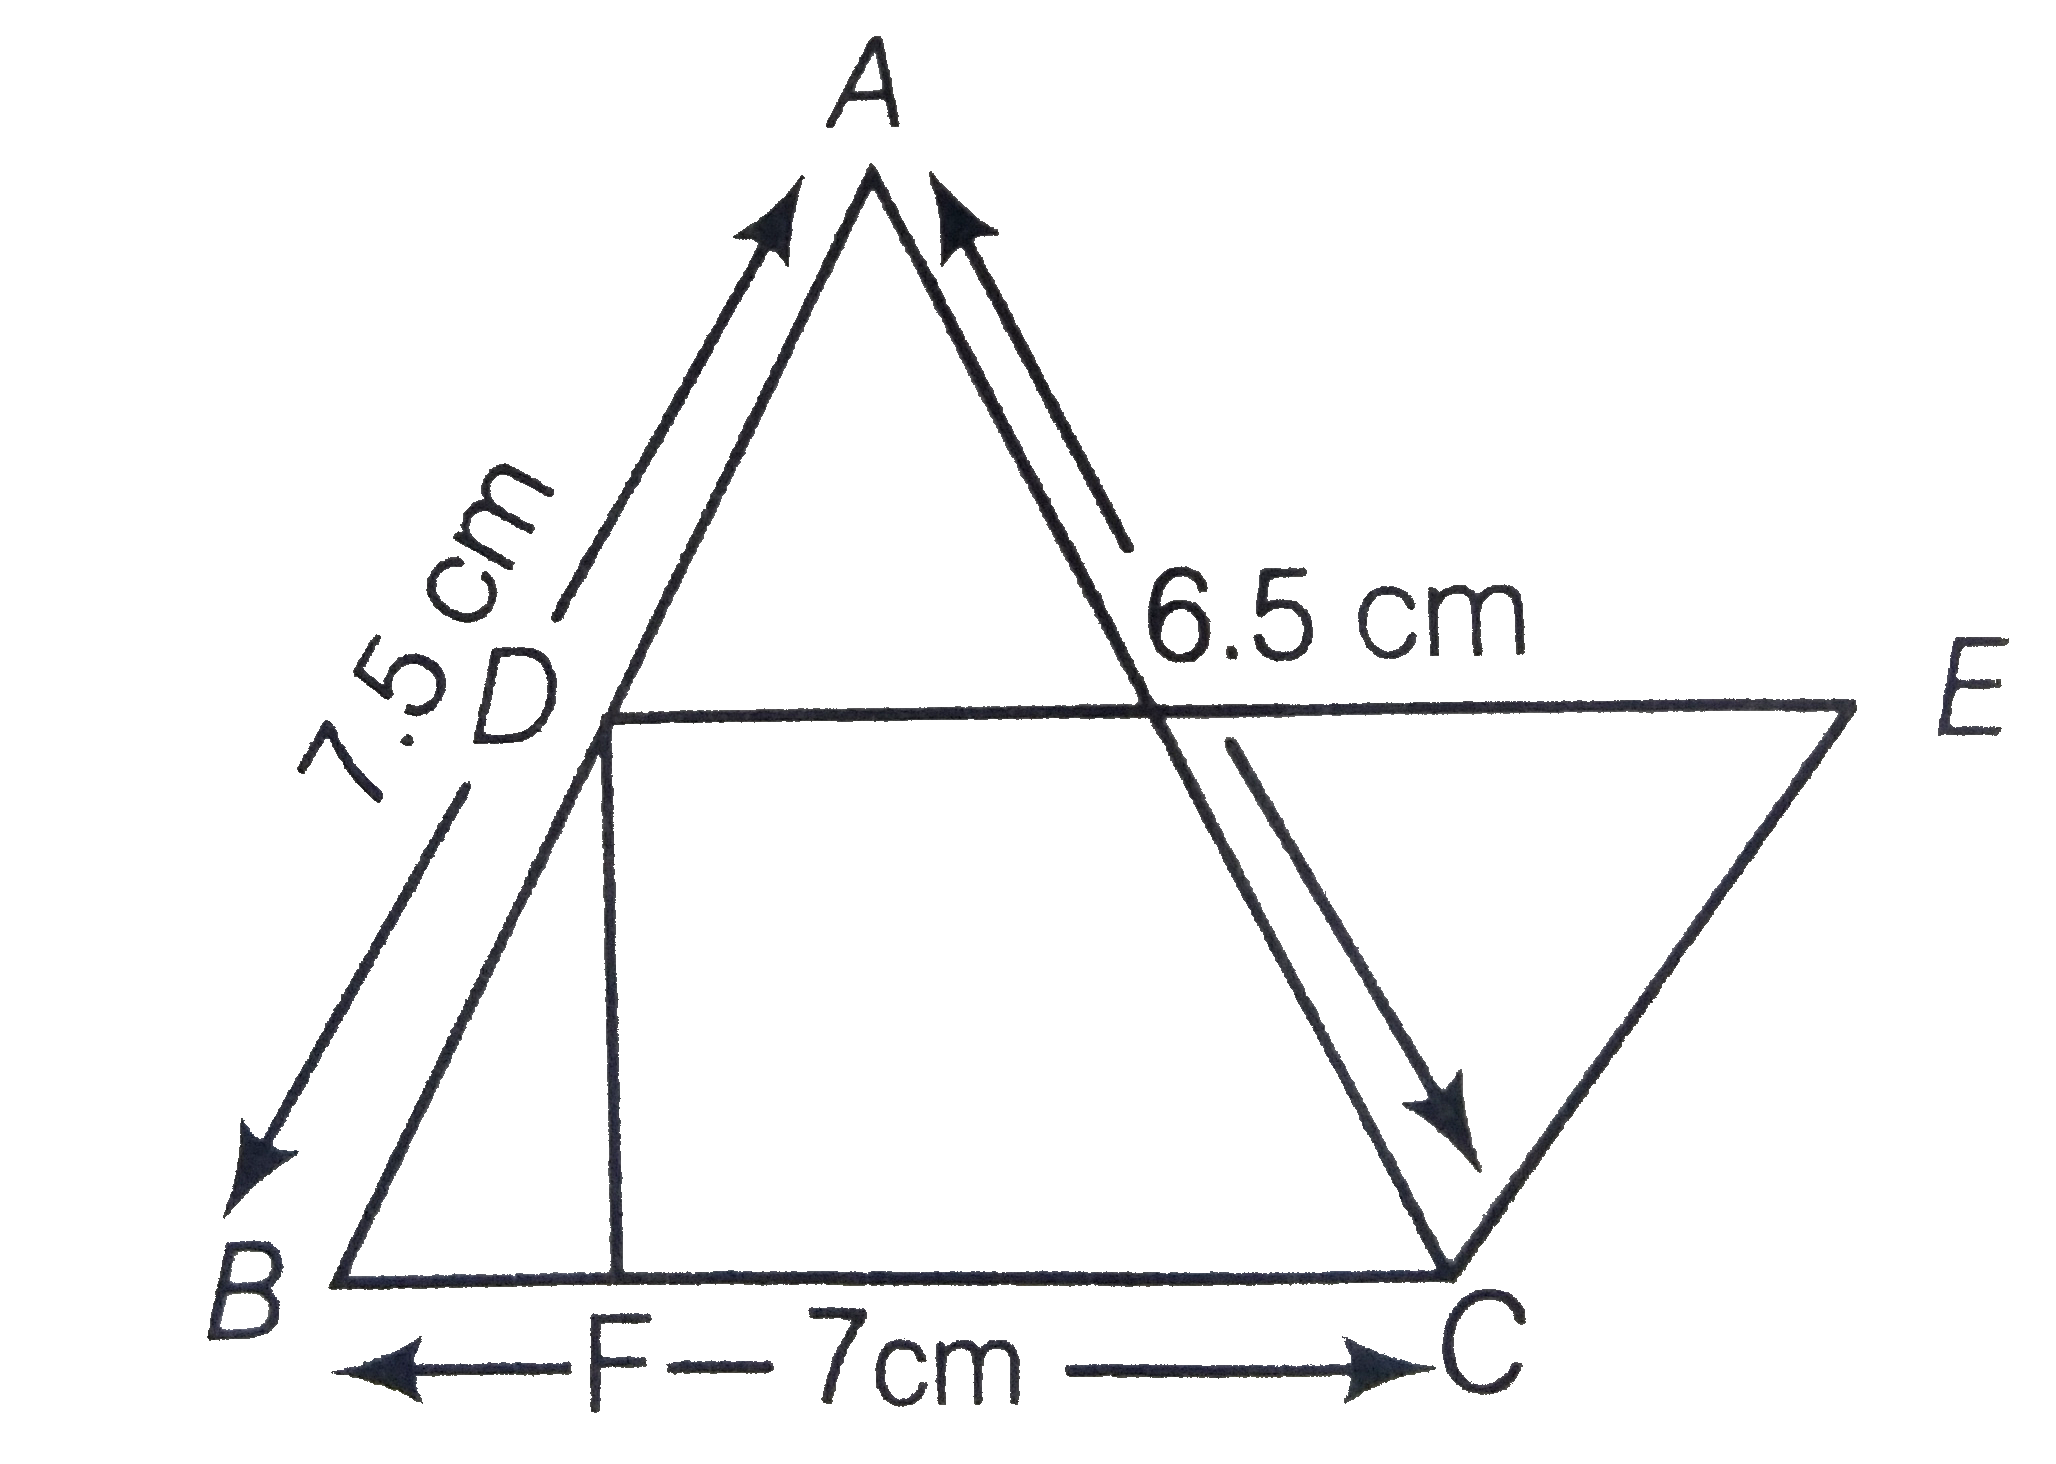 In figure, triangle ABC has sides AB=7.5 cm, AC = 6.5 cm and BC=7cm. On base BC a parallelogram DBCE of same area as that of triangle ABC is constructed. Find the height DF of the parallelogram.